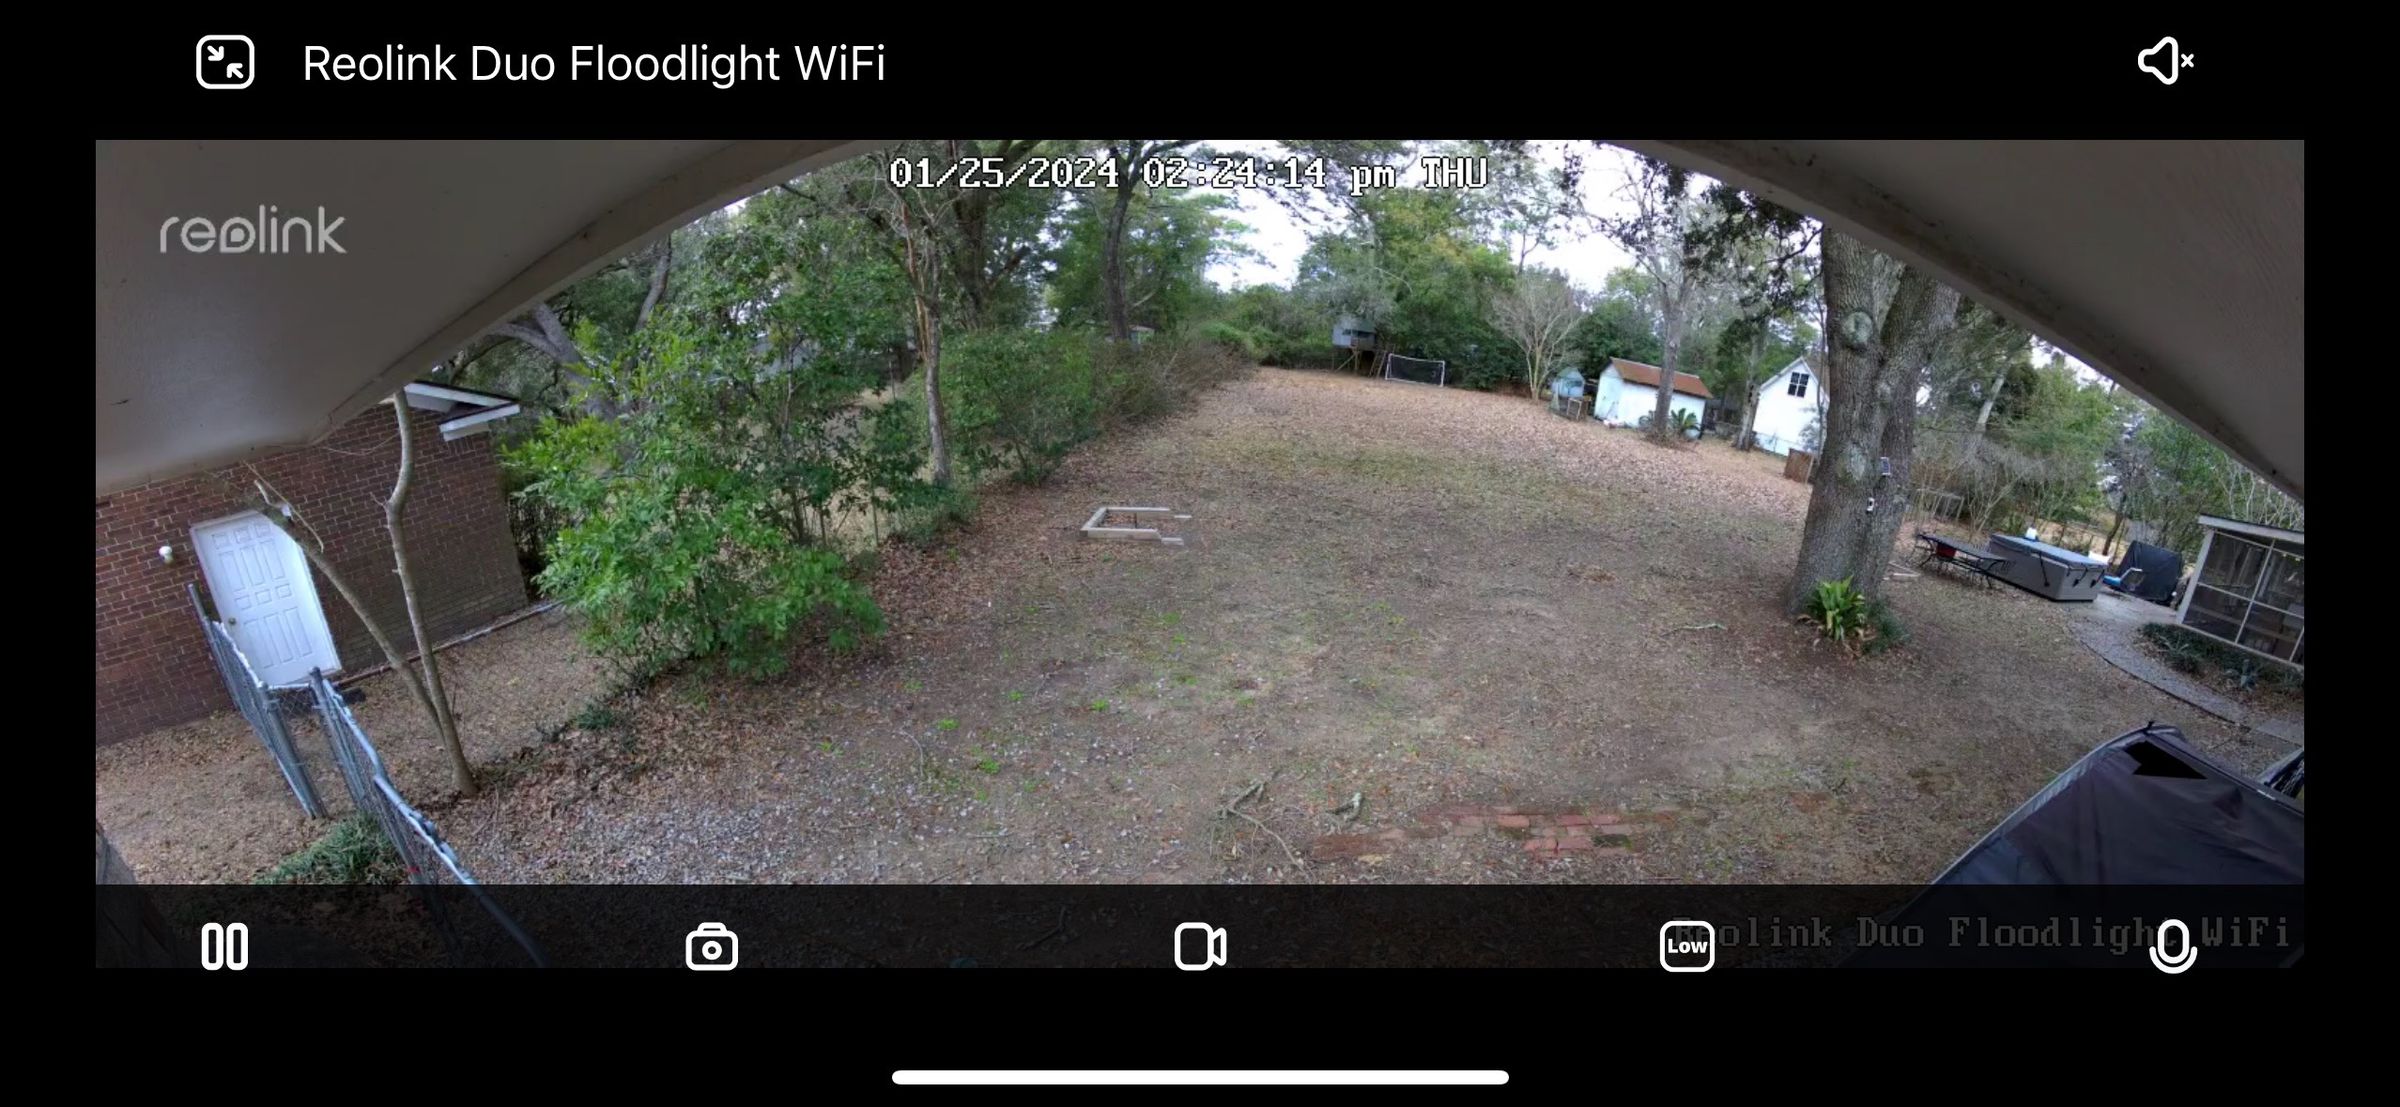 The Reolink has the widest field of view of a non-pan and tilt camera that I tested.